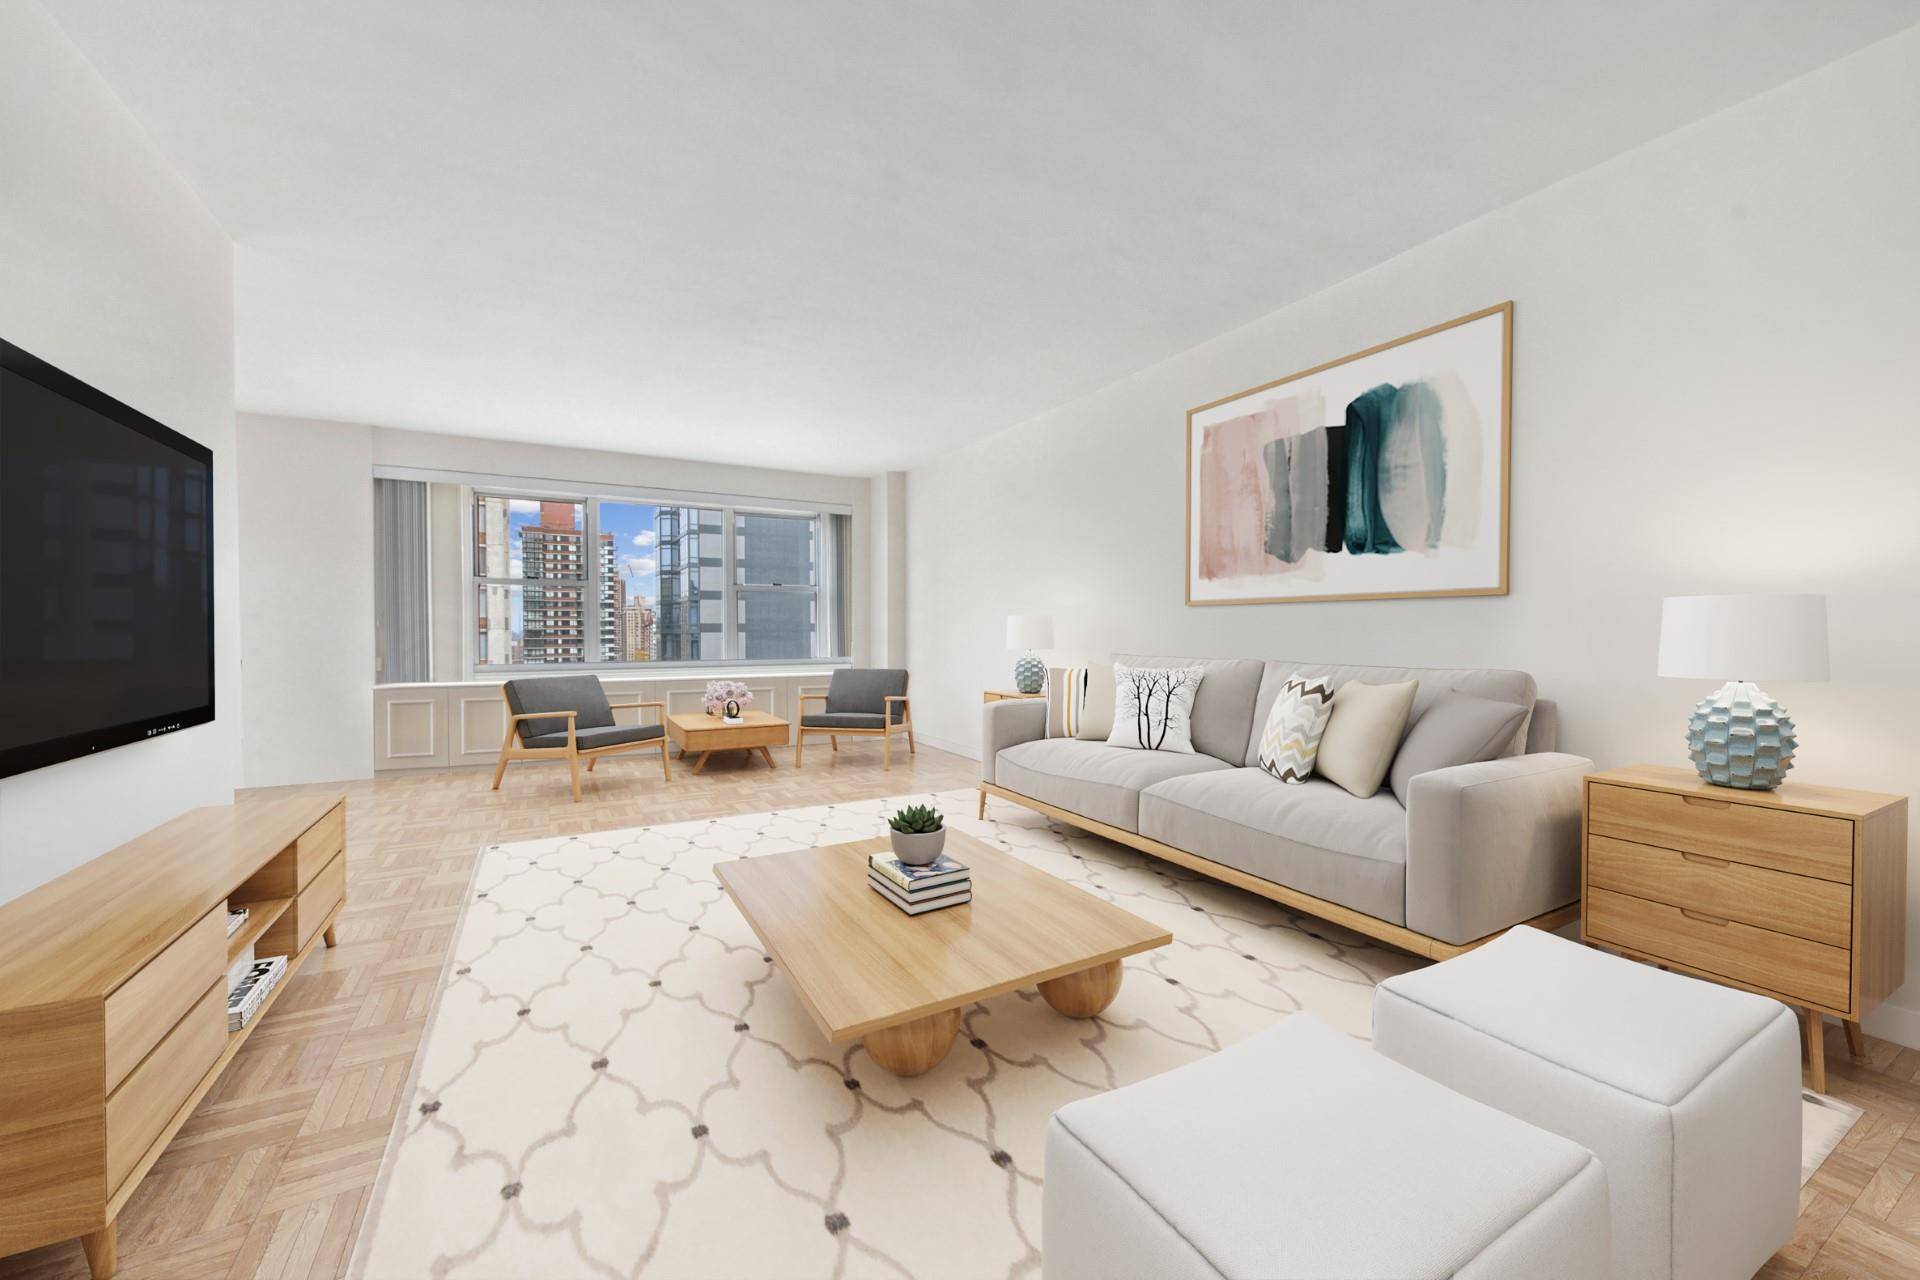 Price reduced on sky high sprawling two bedroom, two bath home in prestigious 360 East 72nd Street.